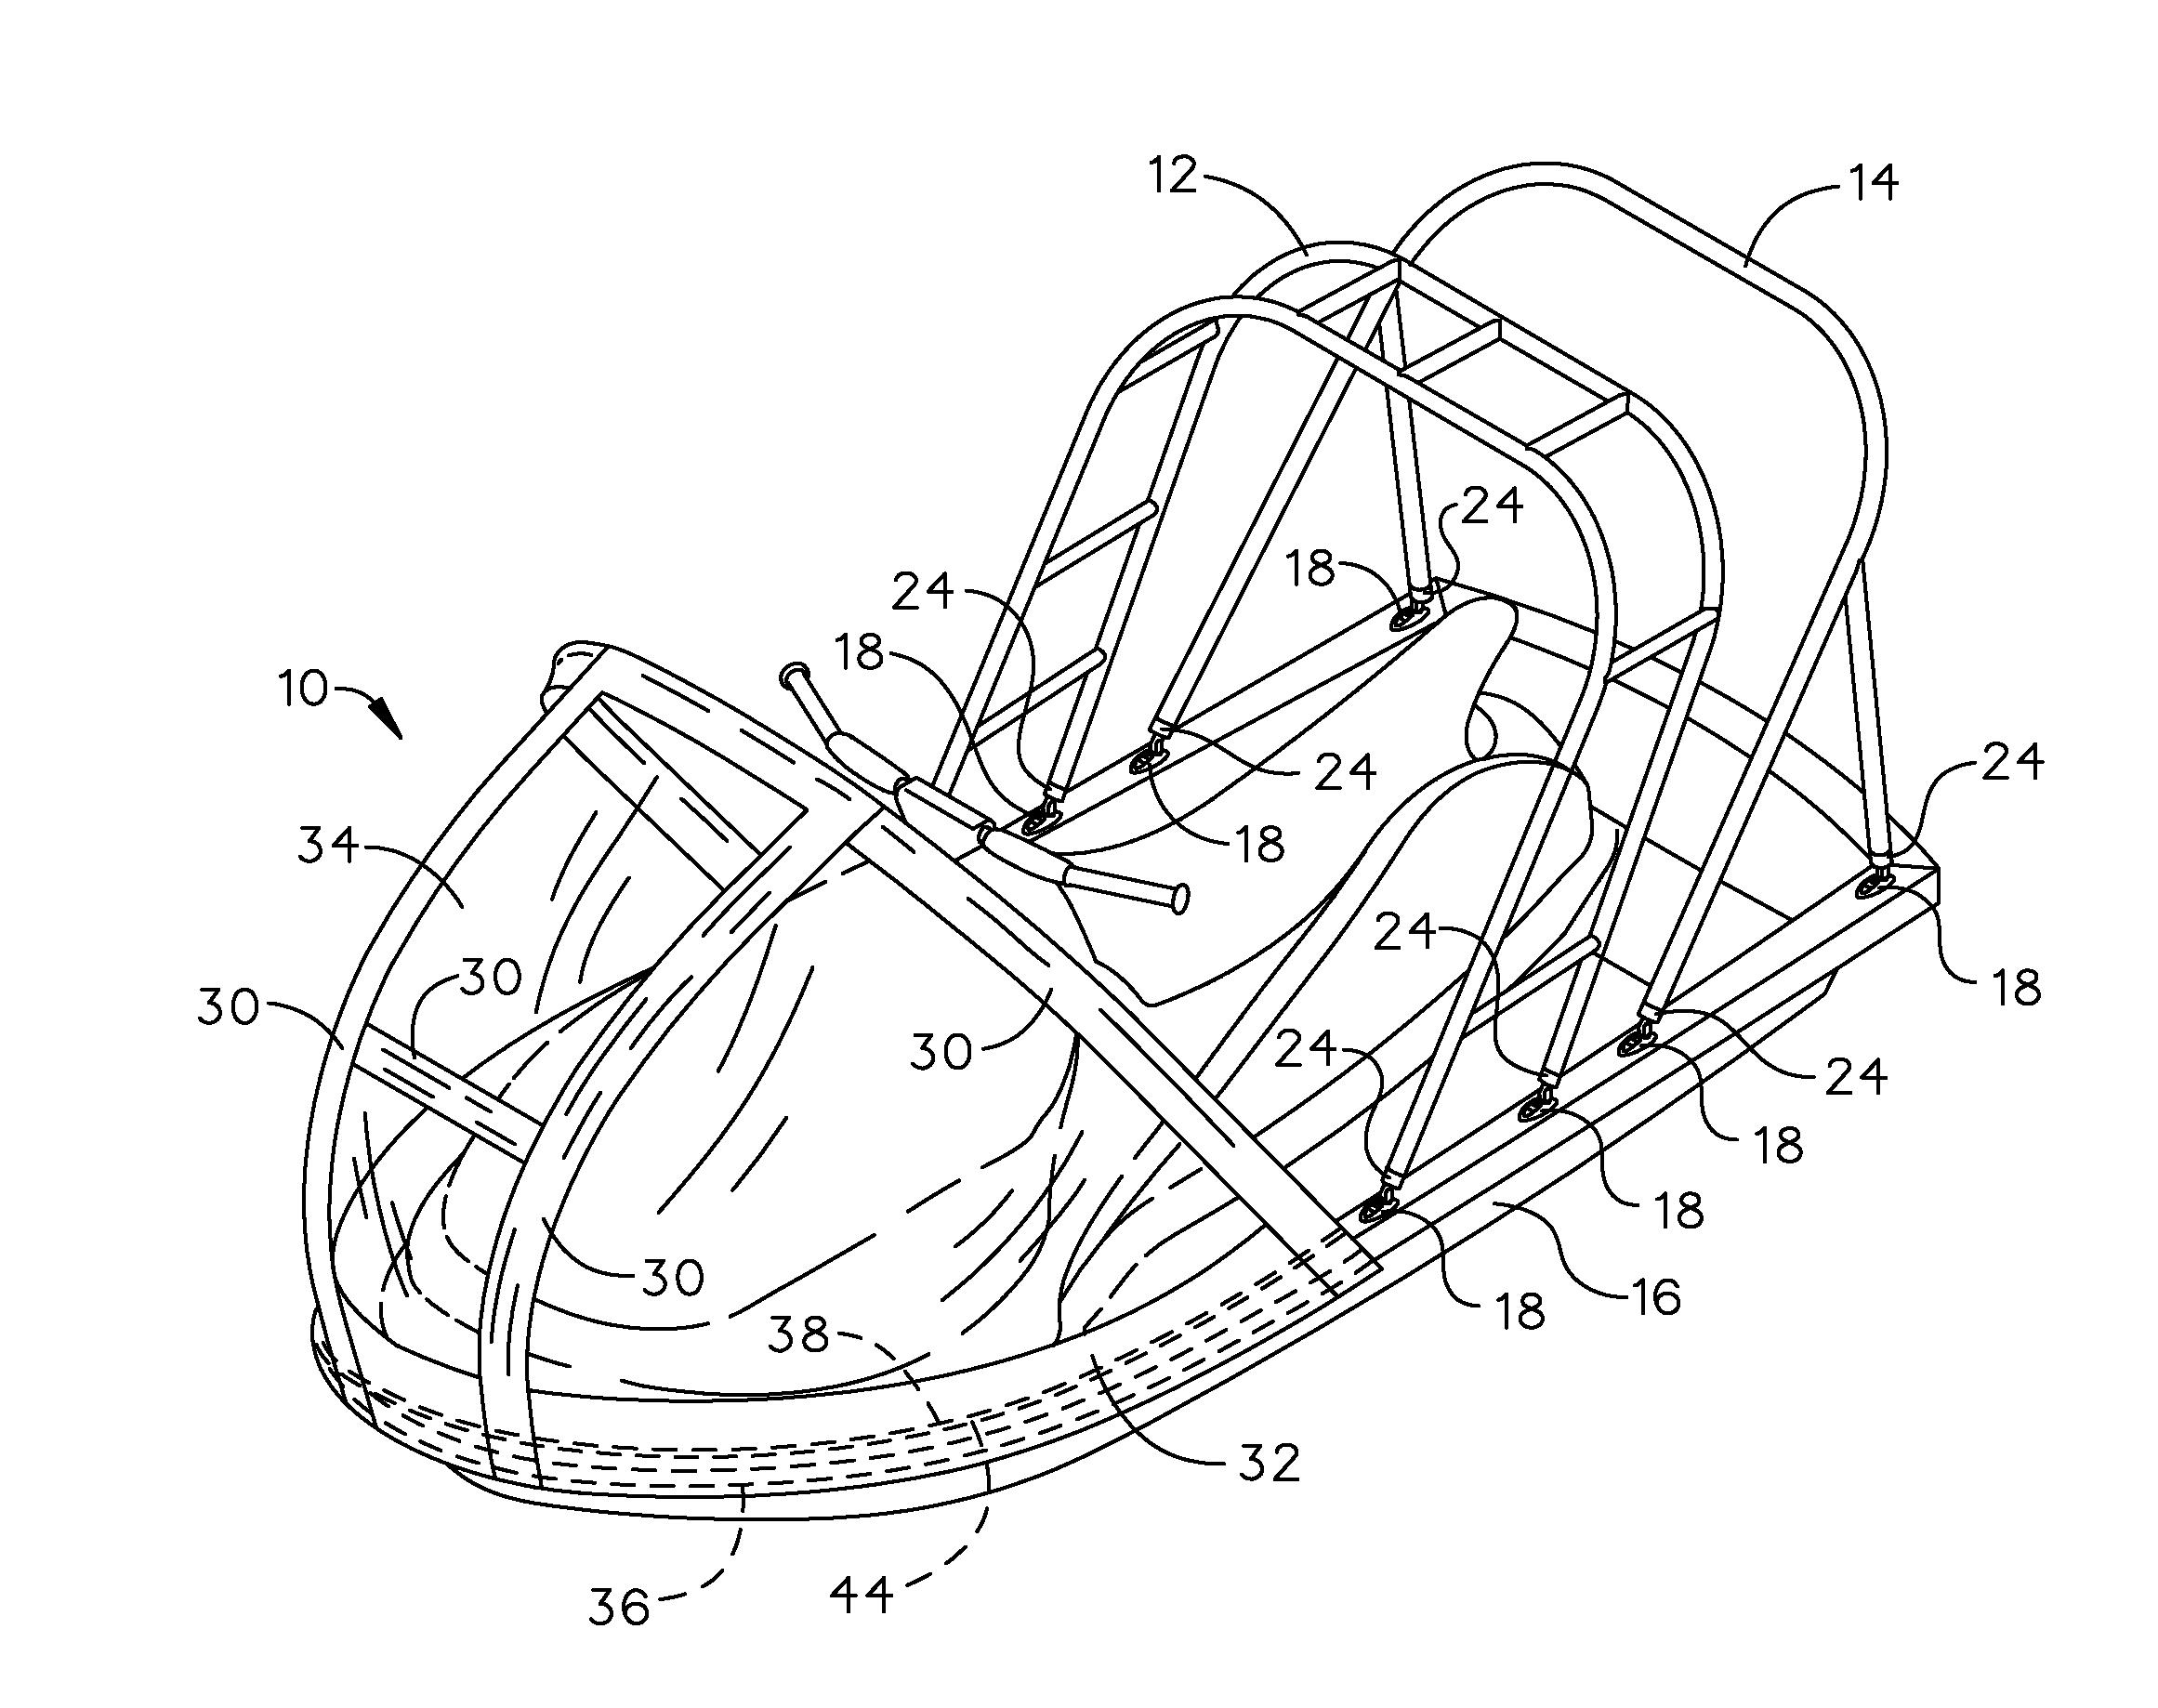 Convertible personal watercraft configuration device and method